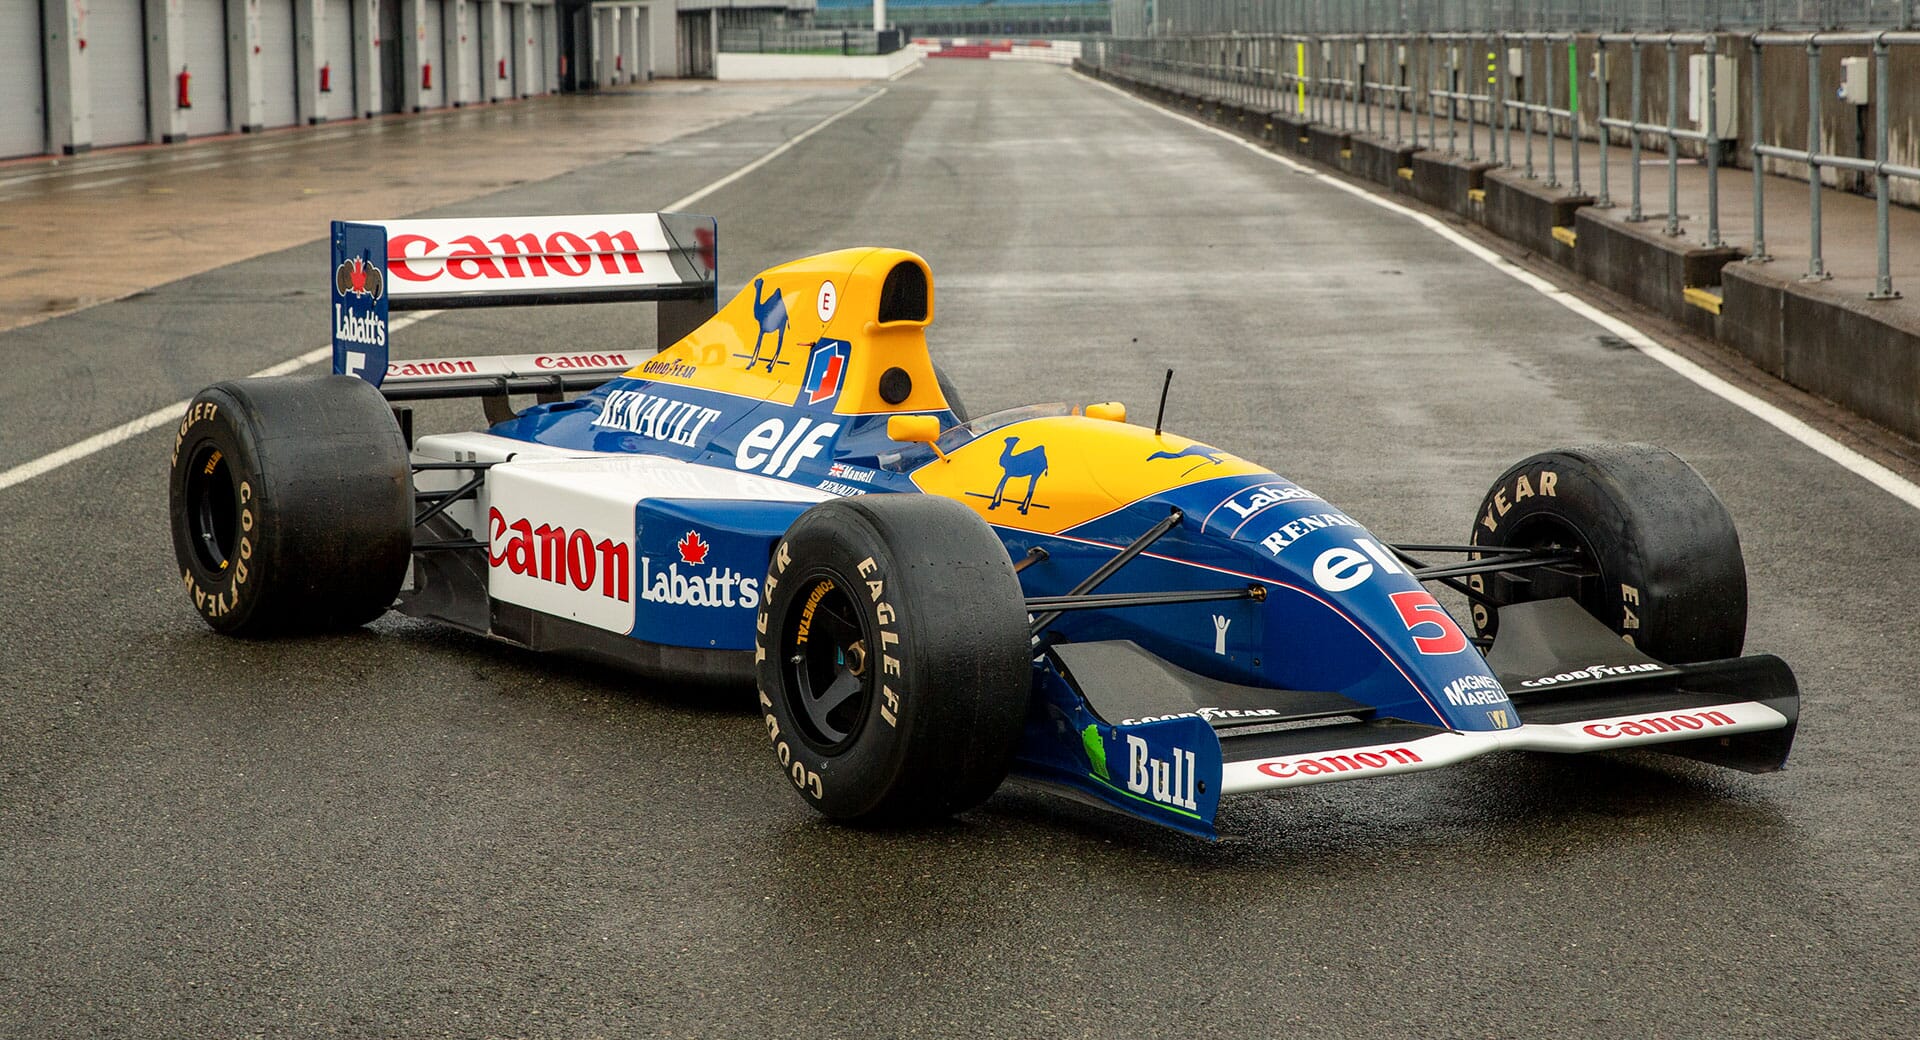 The 12 Fastest F1 Cars Of All Time, Ranked